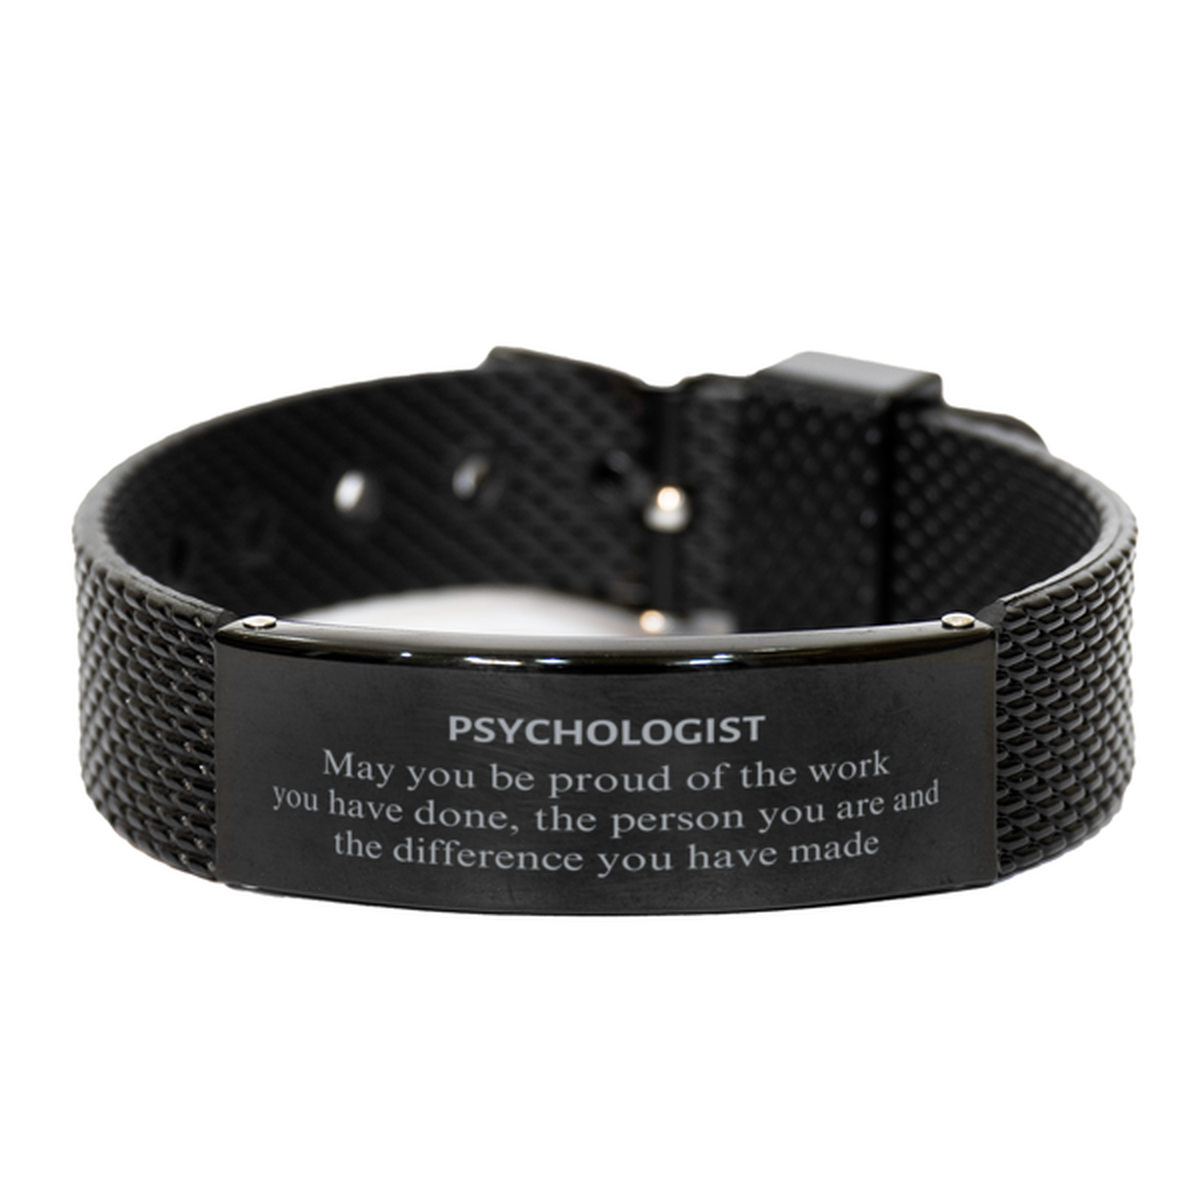 Psychologist May you be proud of the work you have done, Retirement Psychologist Black Shark Mesh Bracelet for Colleague Appreciation Gifts Amazing for Psychologist